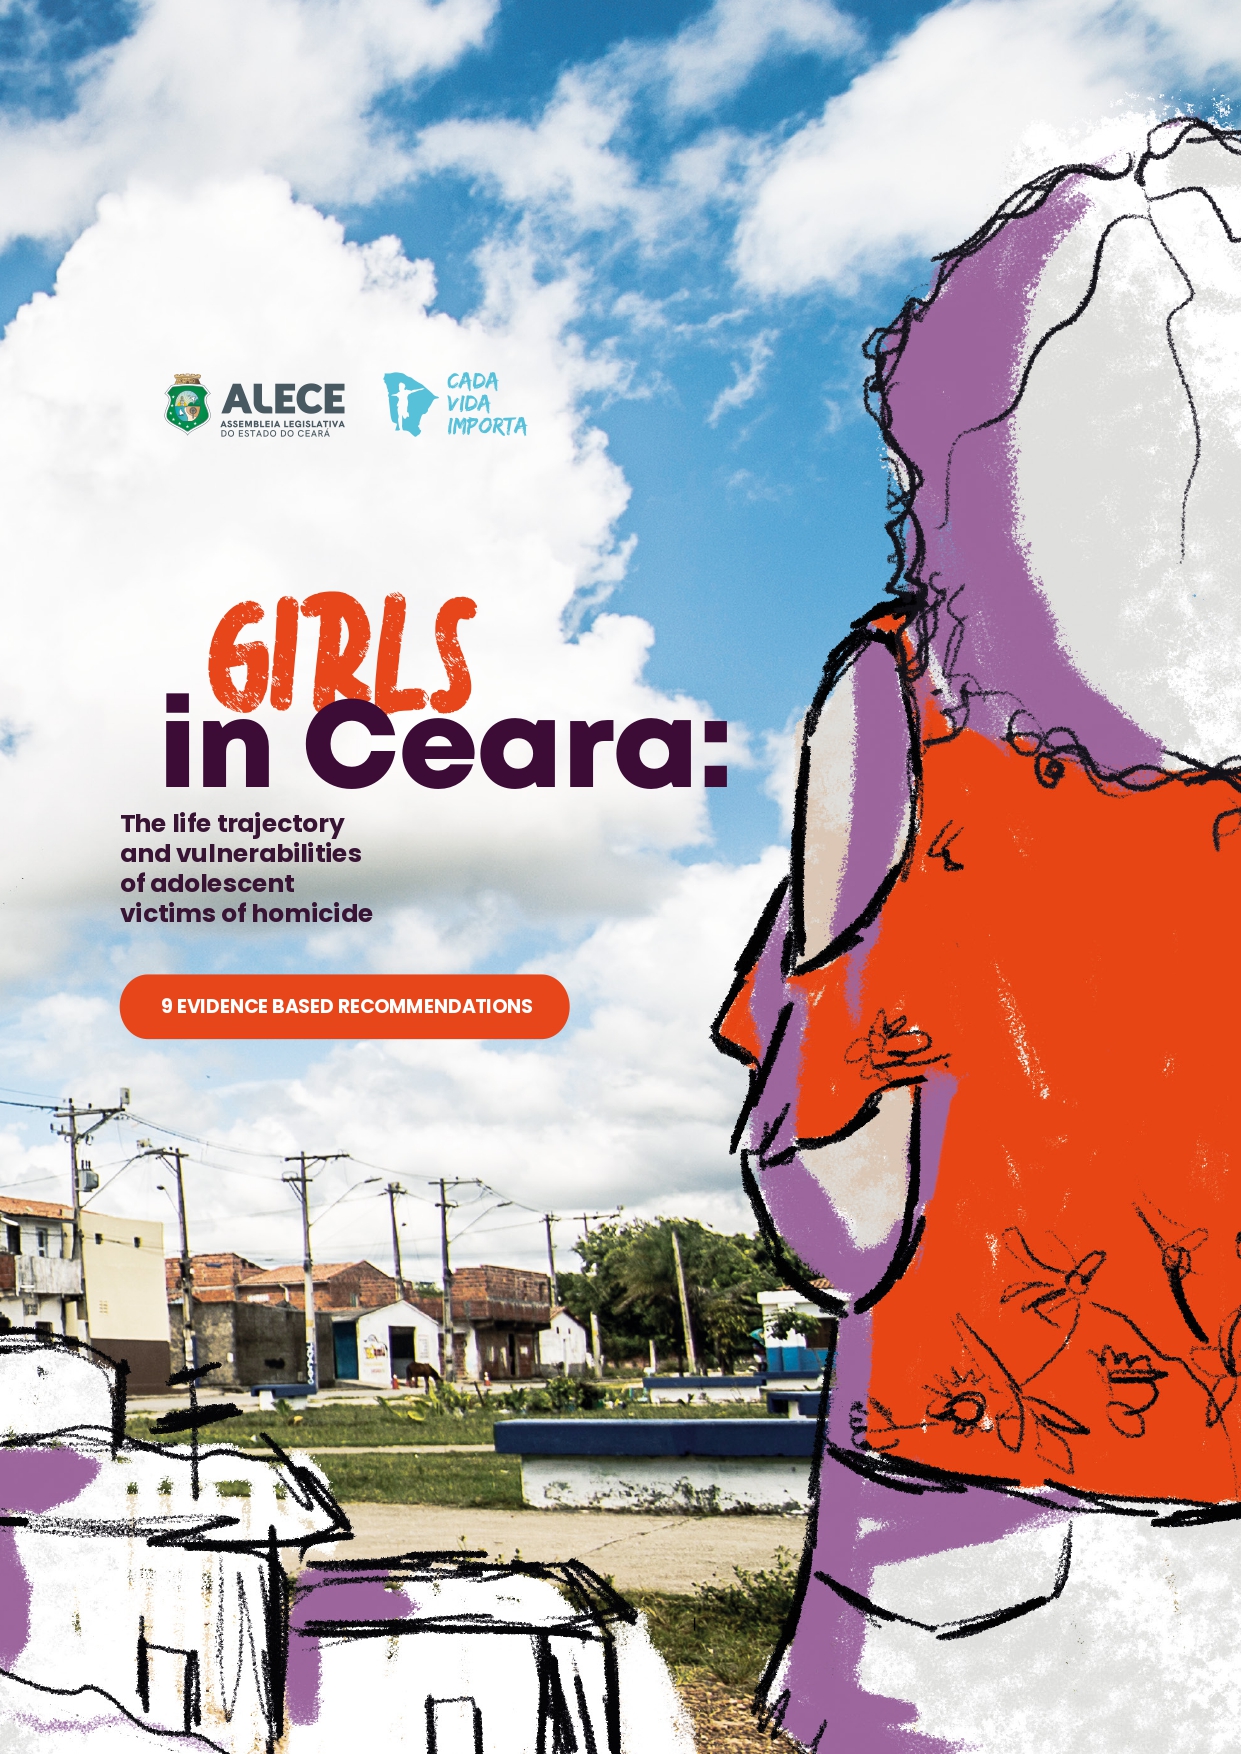 Girls in Ceará: 9 Evidence Based Recommendations (English version)